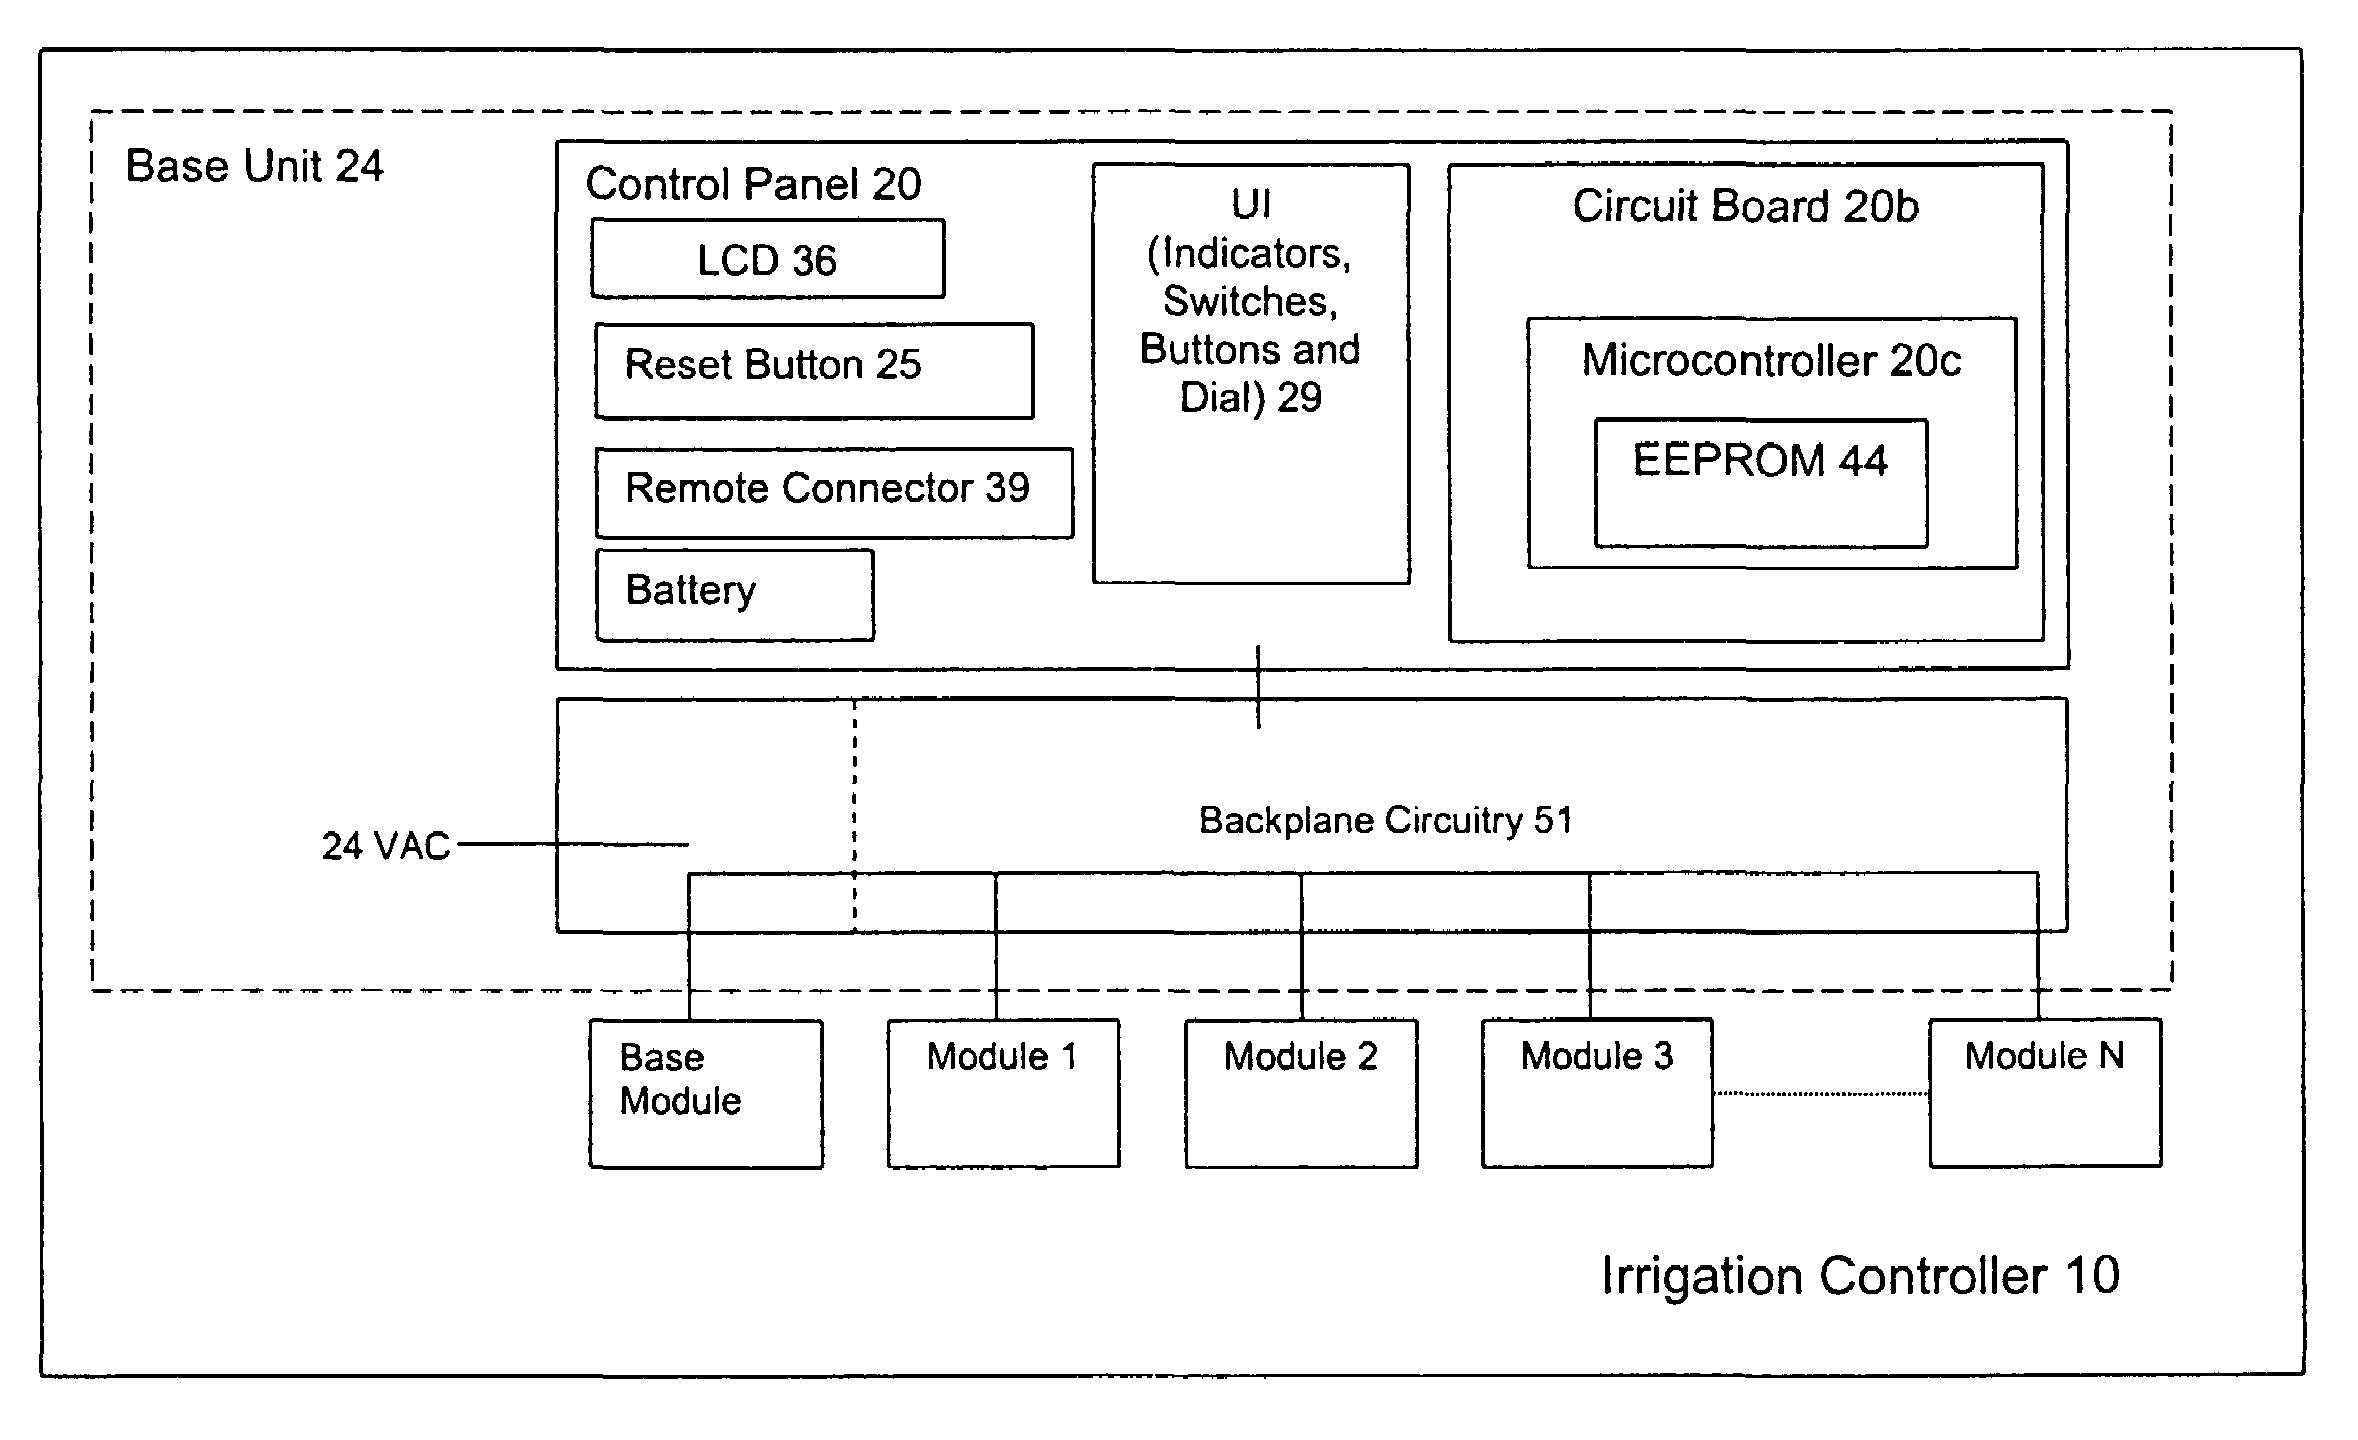 Open architecture modularity for irrigation controllers